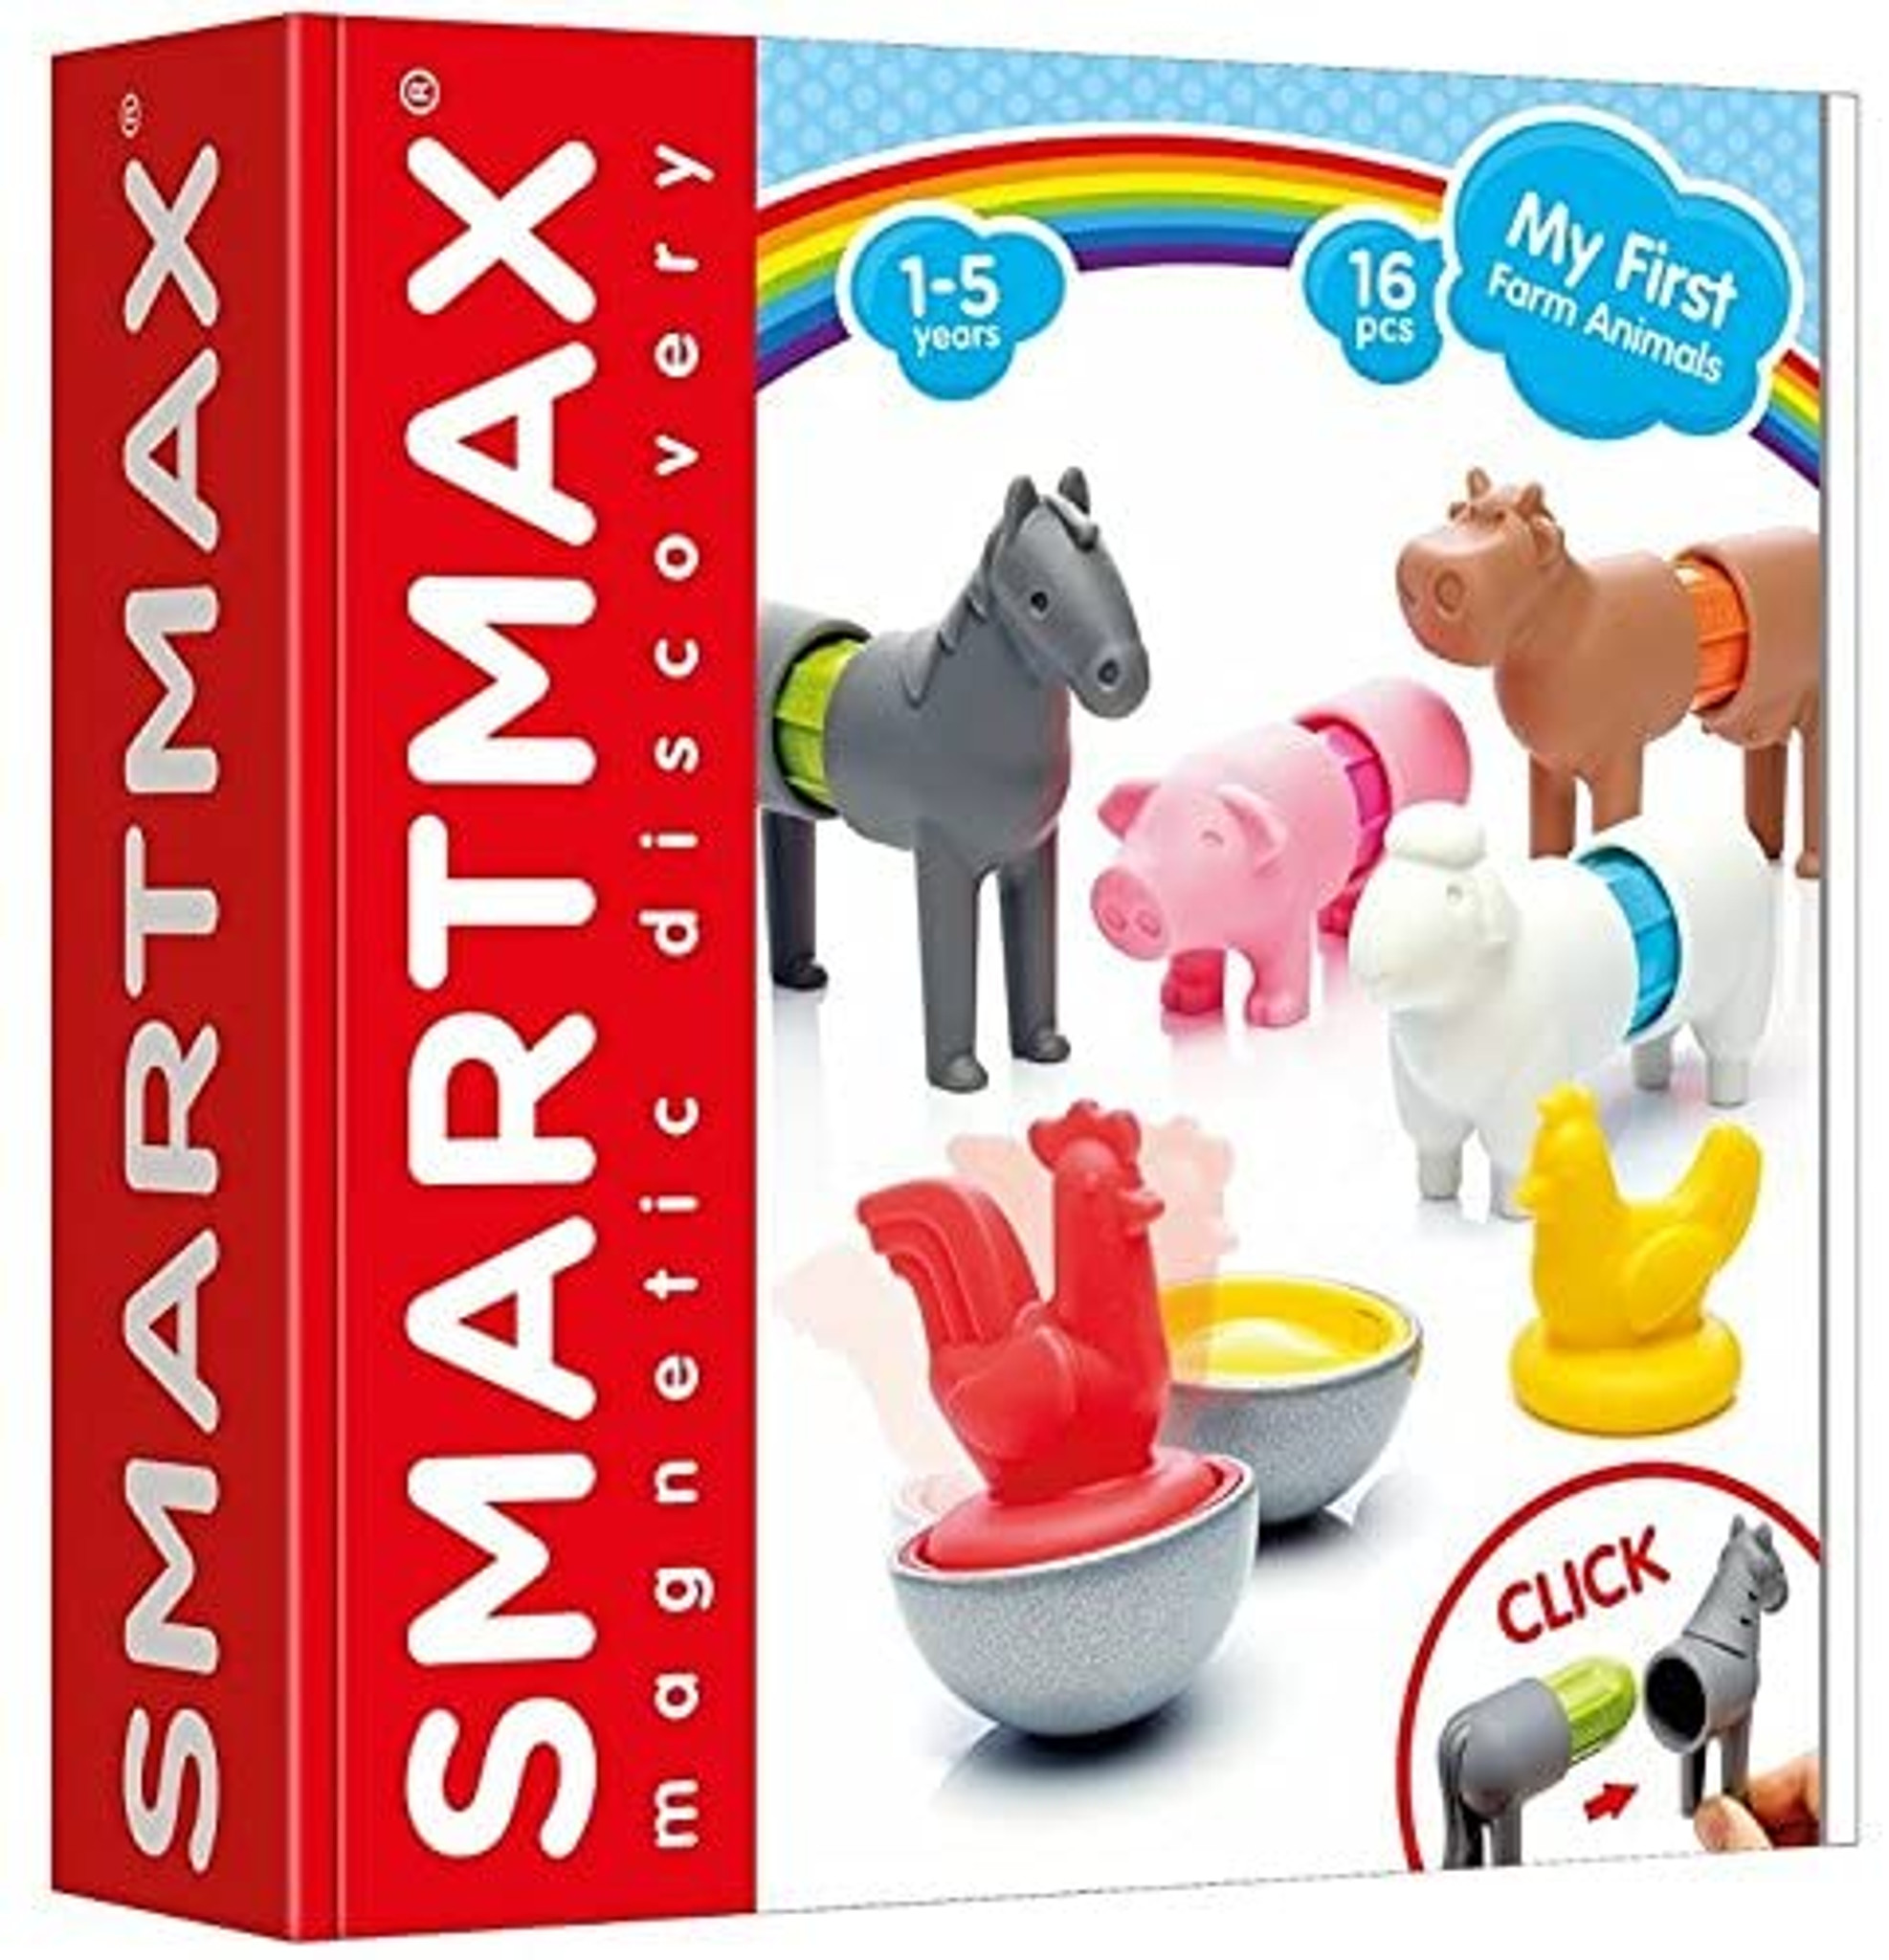  SmartMax My First Vehicles Magnetic Discovery STEM